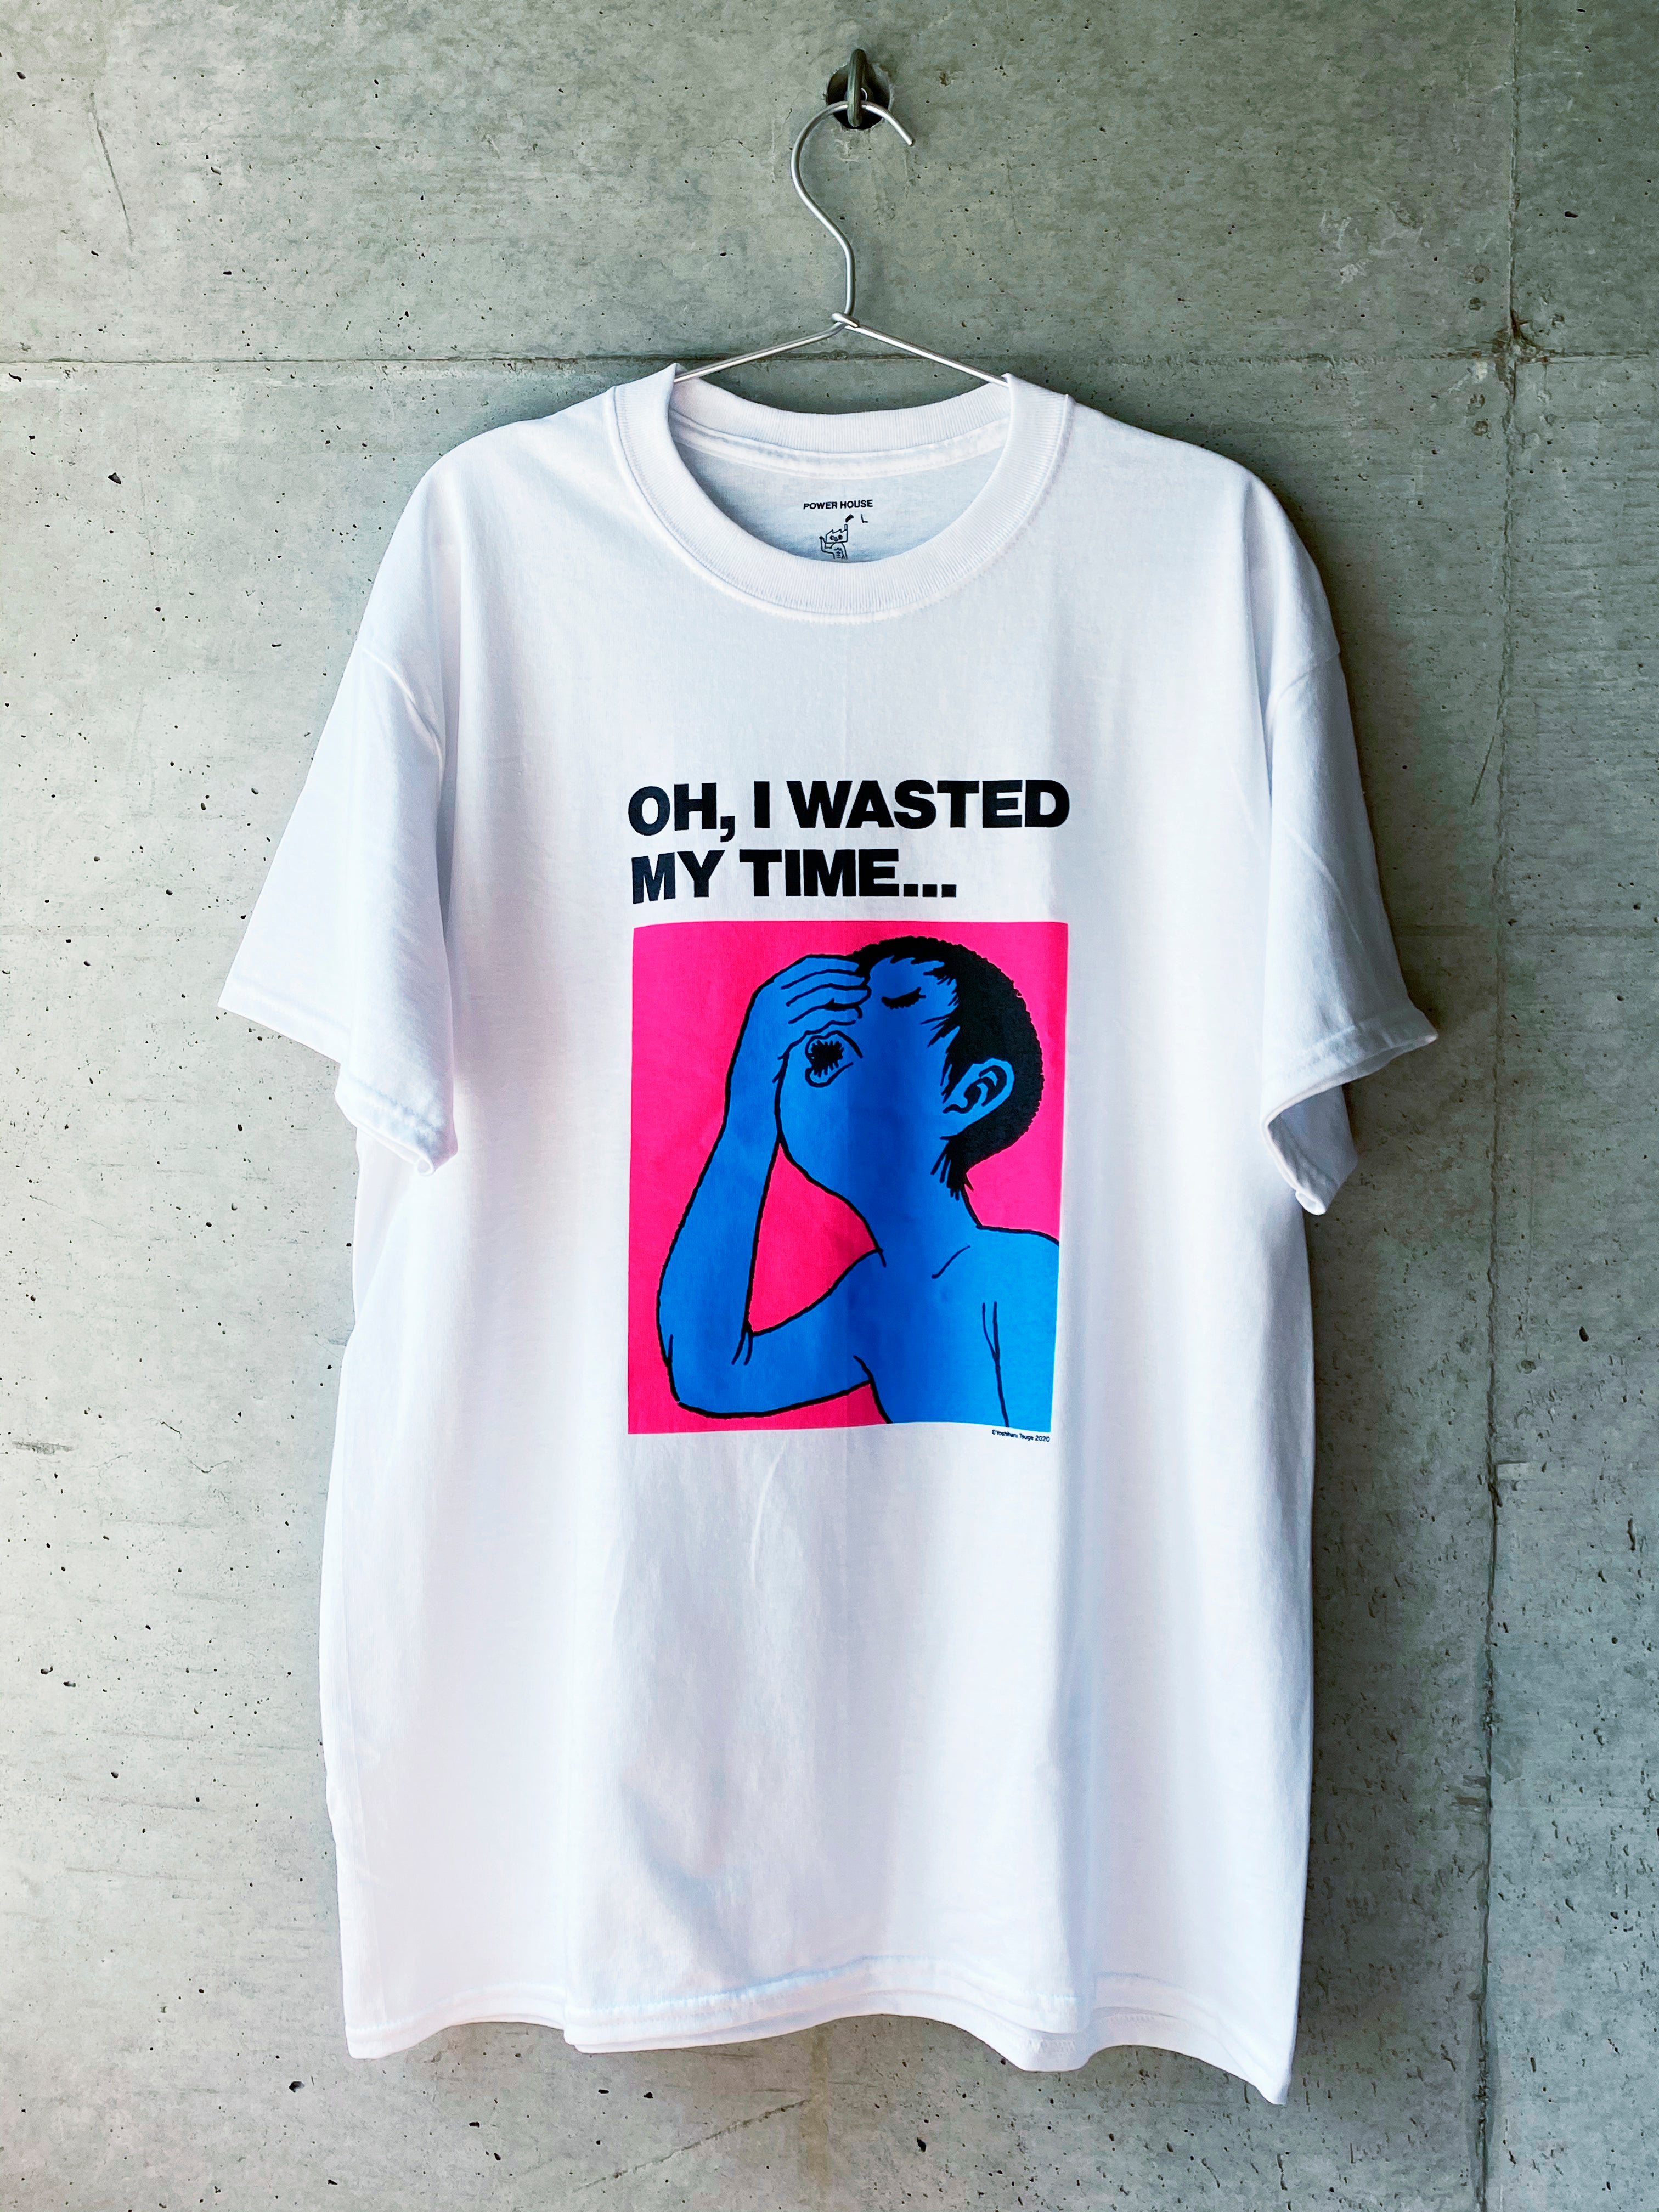 “OH, I WASTED MY TIME” , つげTEE